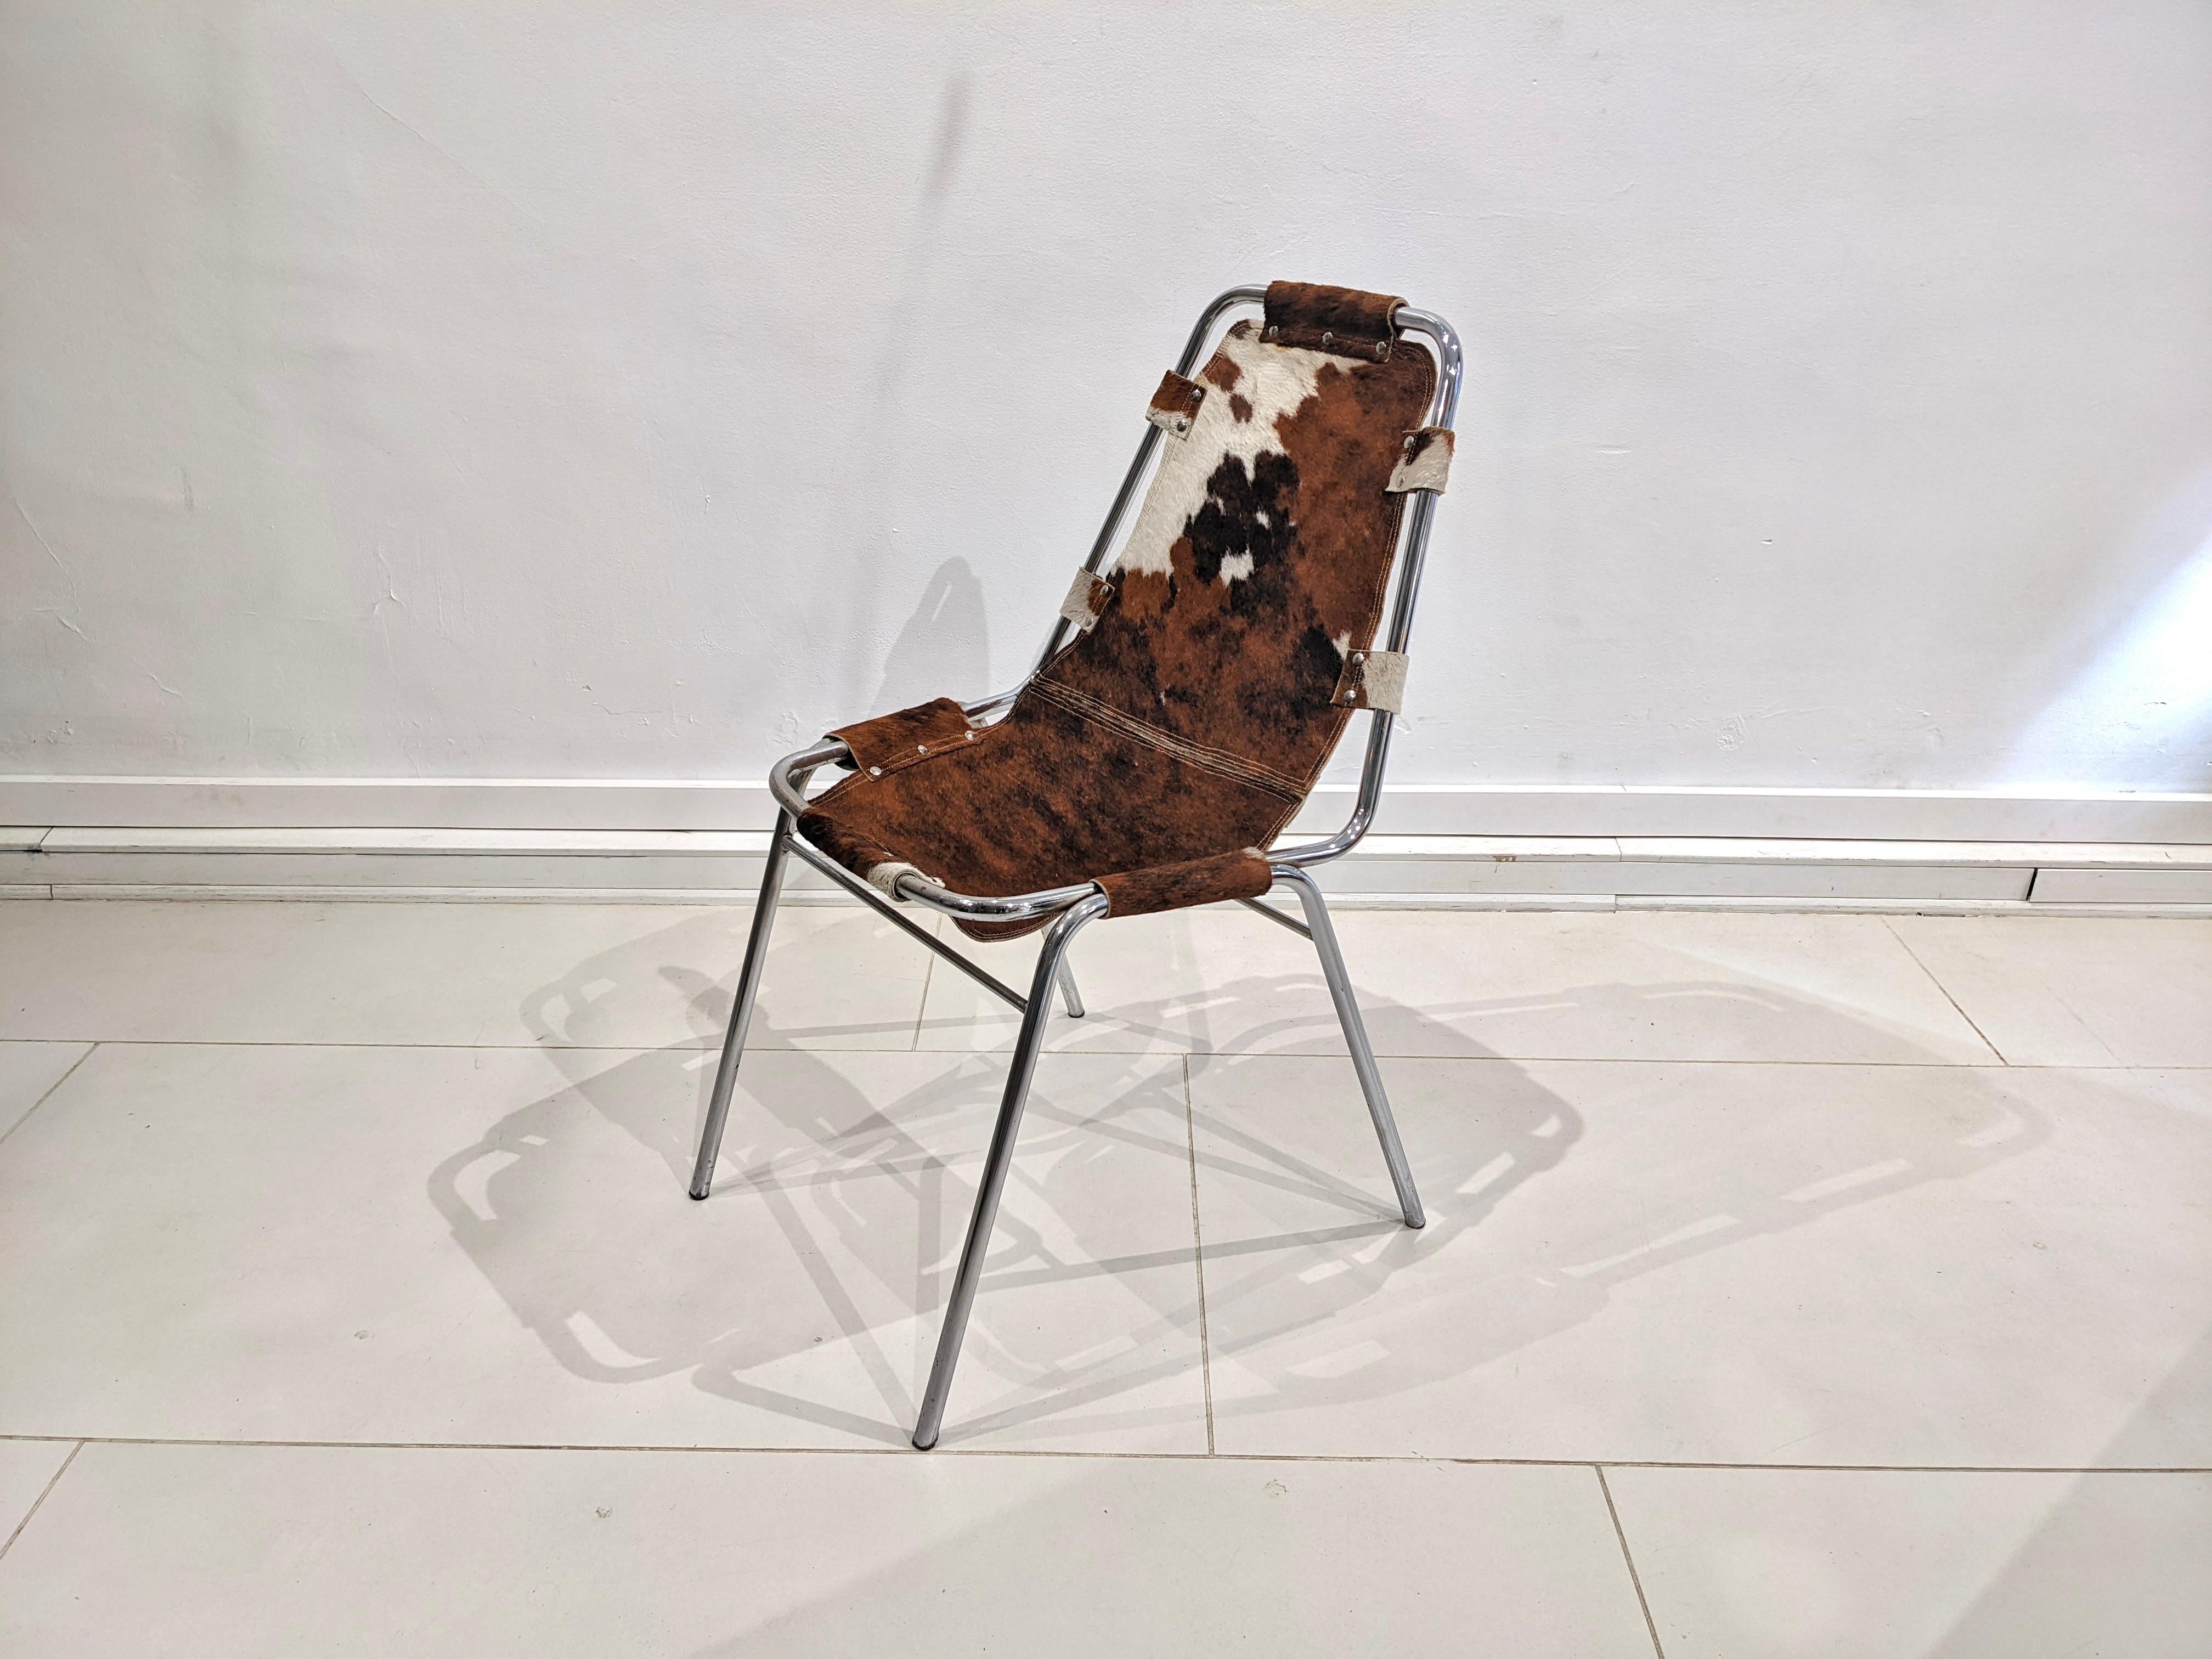 Cowhide chair by Charlotte Perriand for Les Arcs. 
Circa 1960. Good condition. Tubular steel structure and cowhide seat. 
Provenance : Les arcs 1600 - France 

Dimensions : H83 cm x W47 cm x D36 cm.